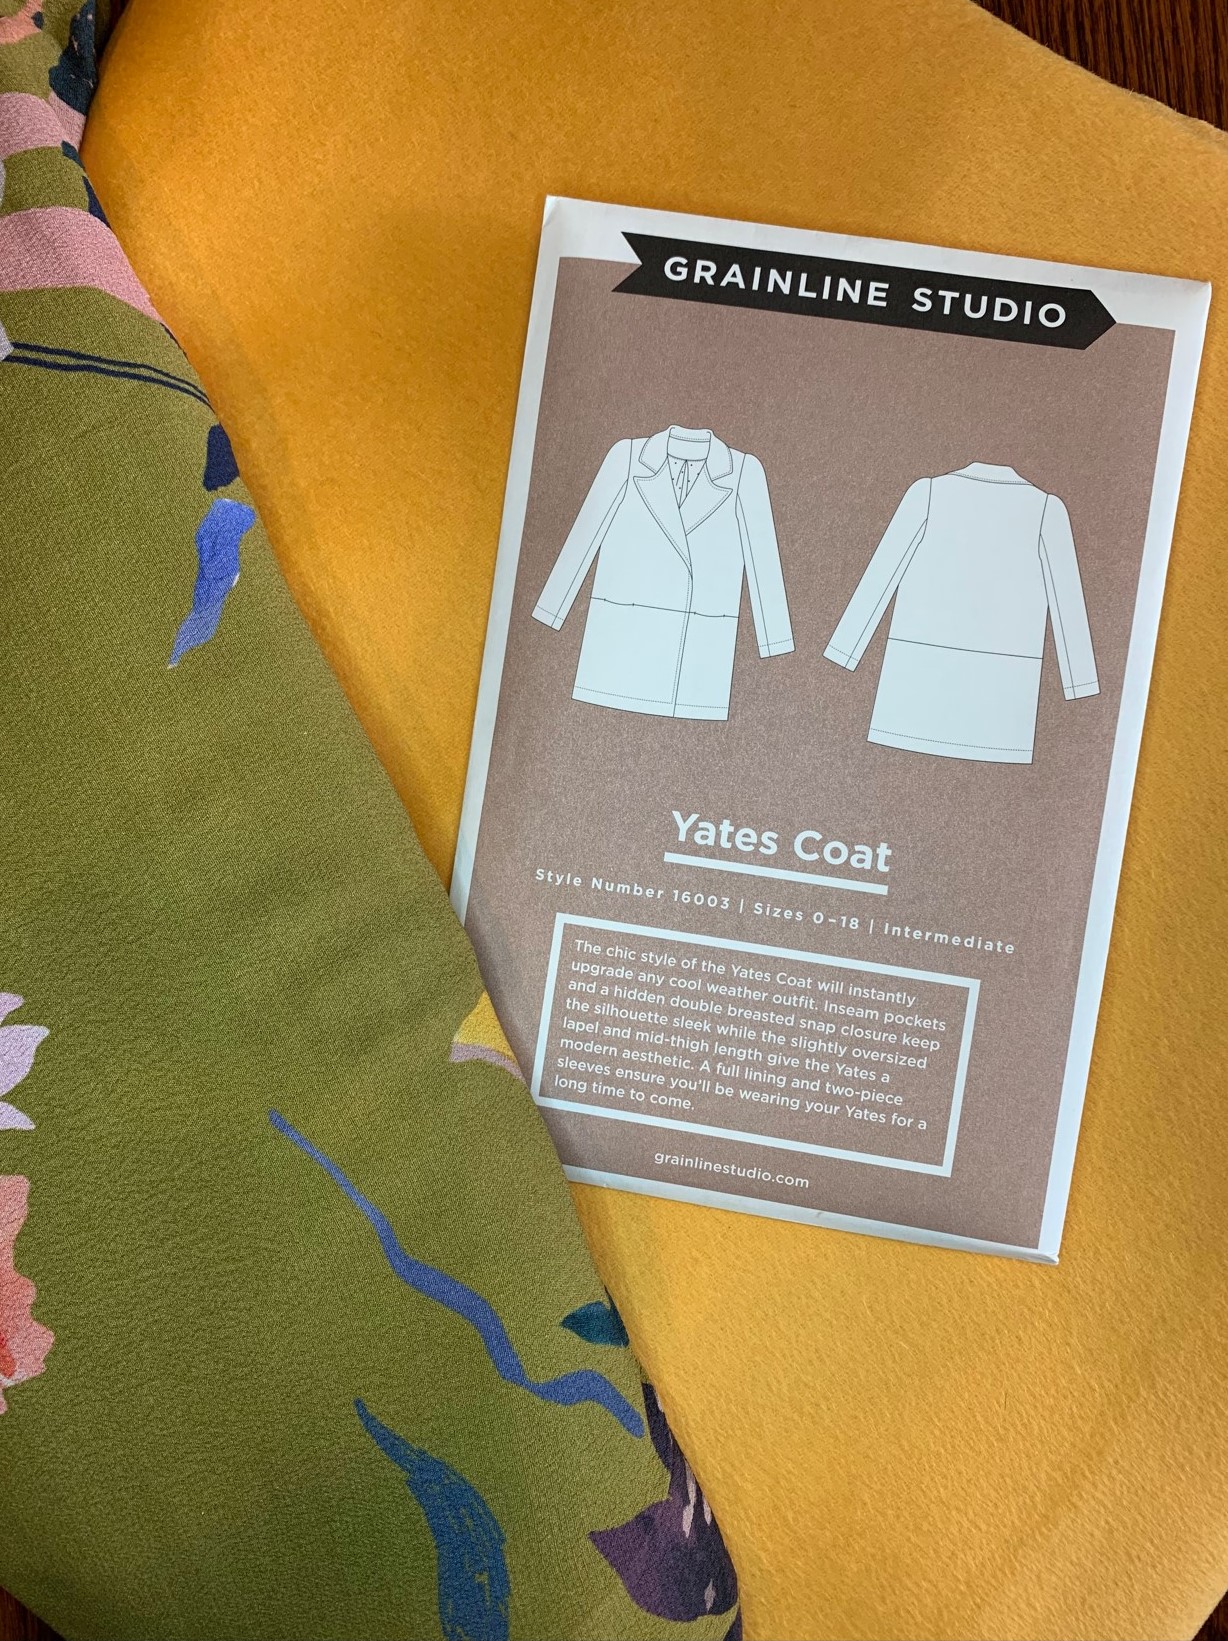 Twill Fabric 101  Twill Cloth Sewing Guide